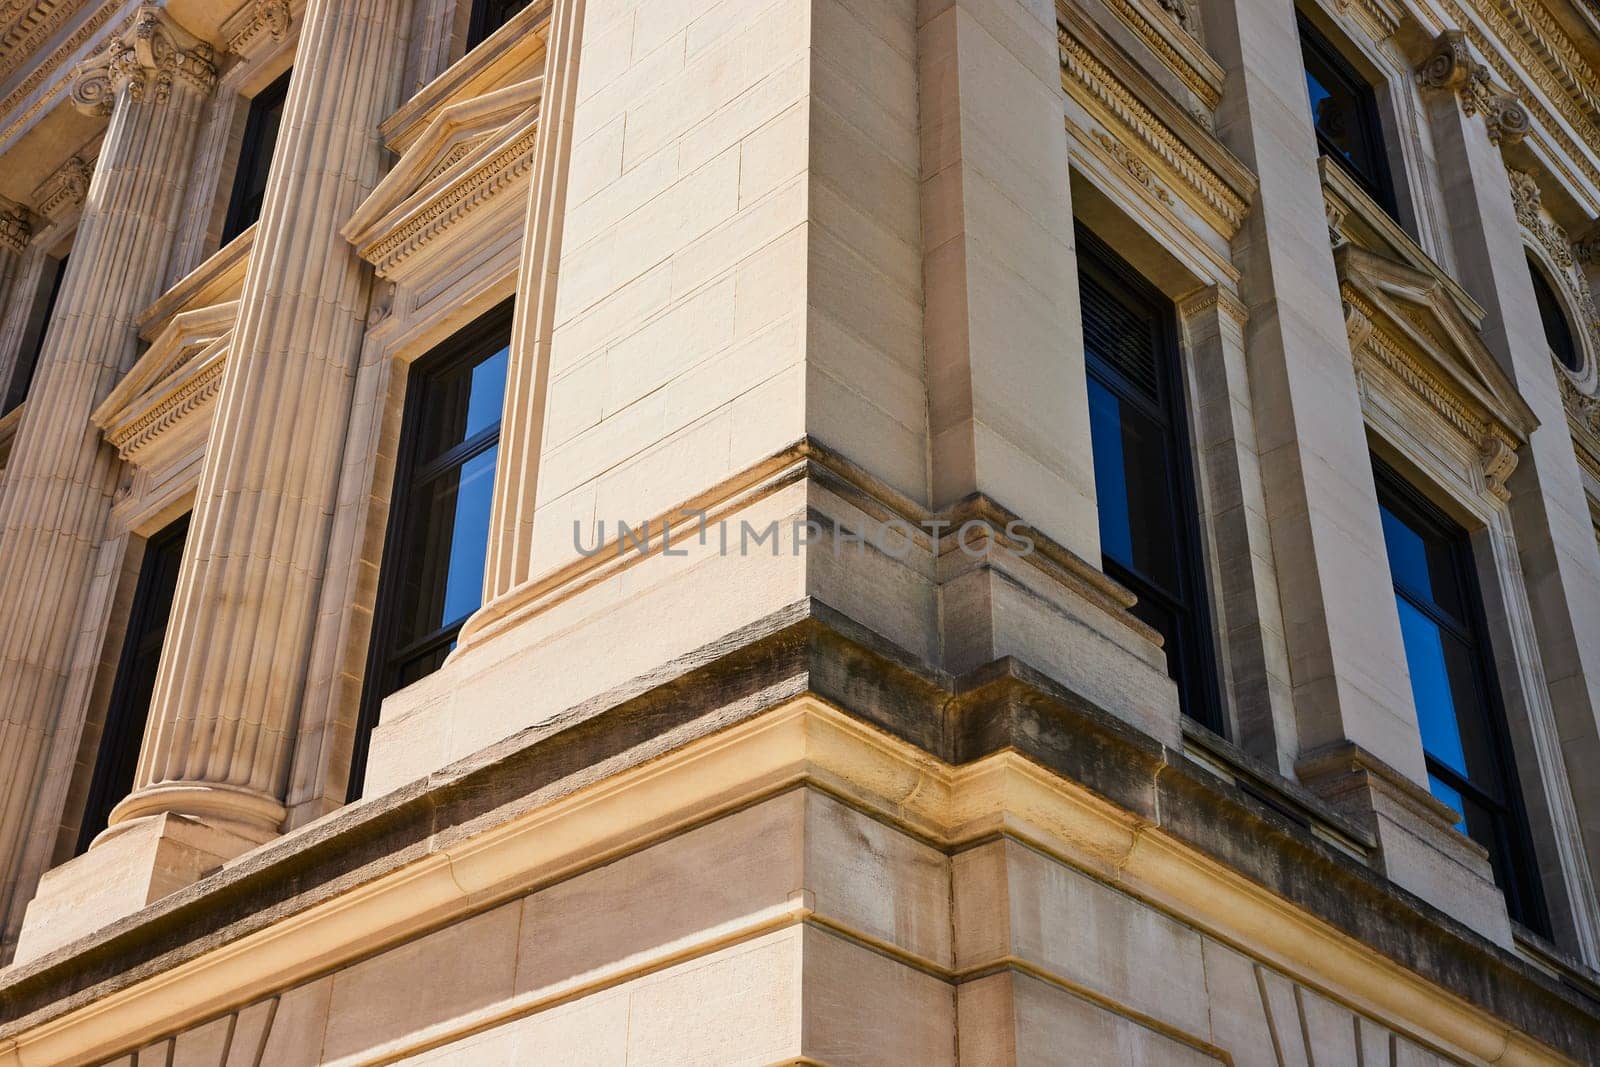 Classical yet modern architectural facade in downtown Fort Wayne, showcasing ornate columns and blue windows.